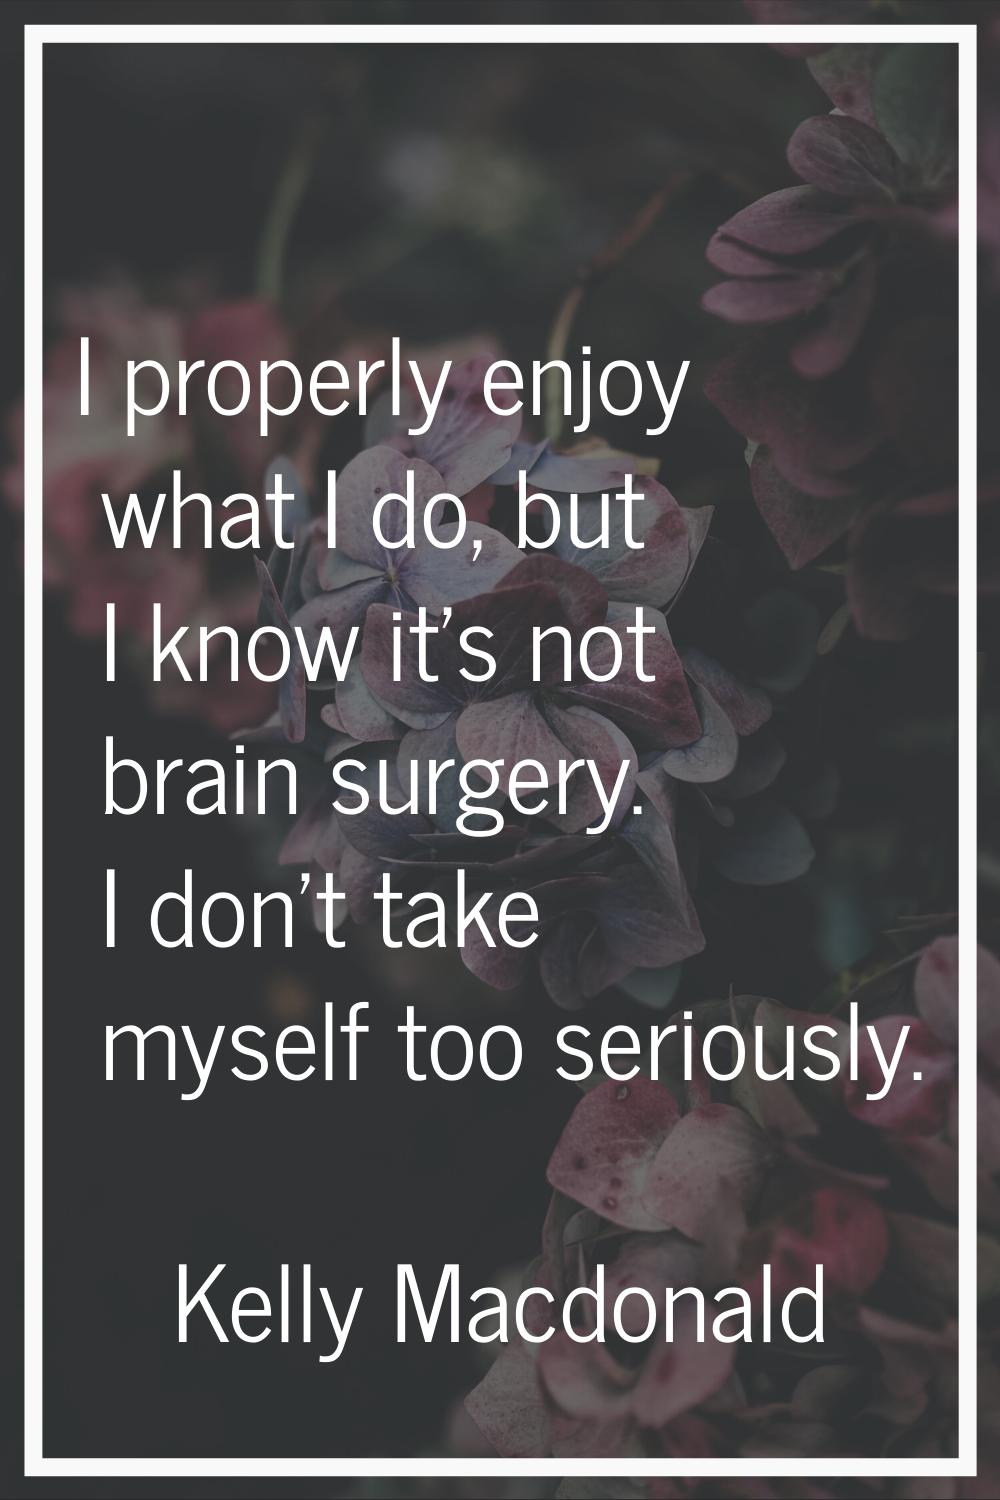 I properly enjoy what I do, but I know it's not brain surgery. I don't take myself too seriously.